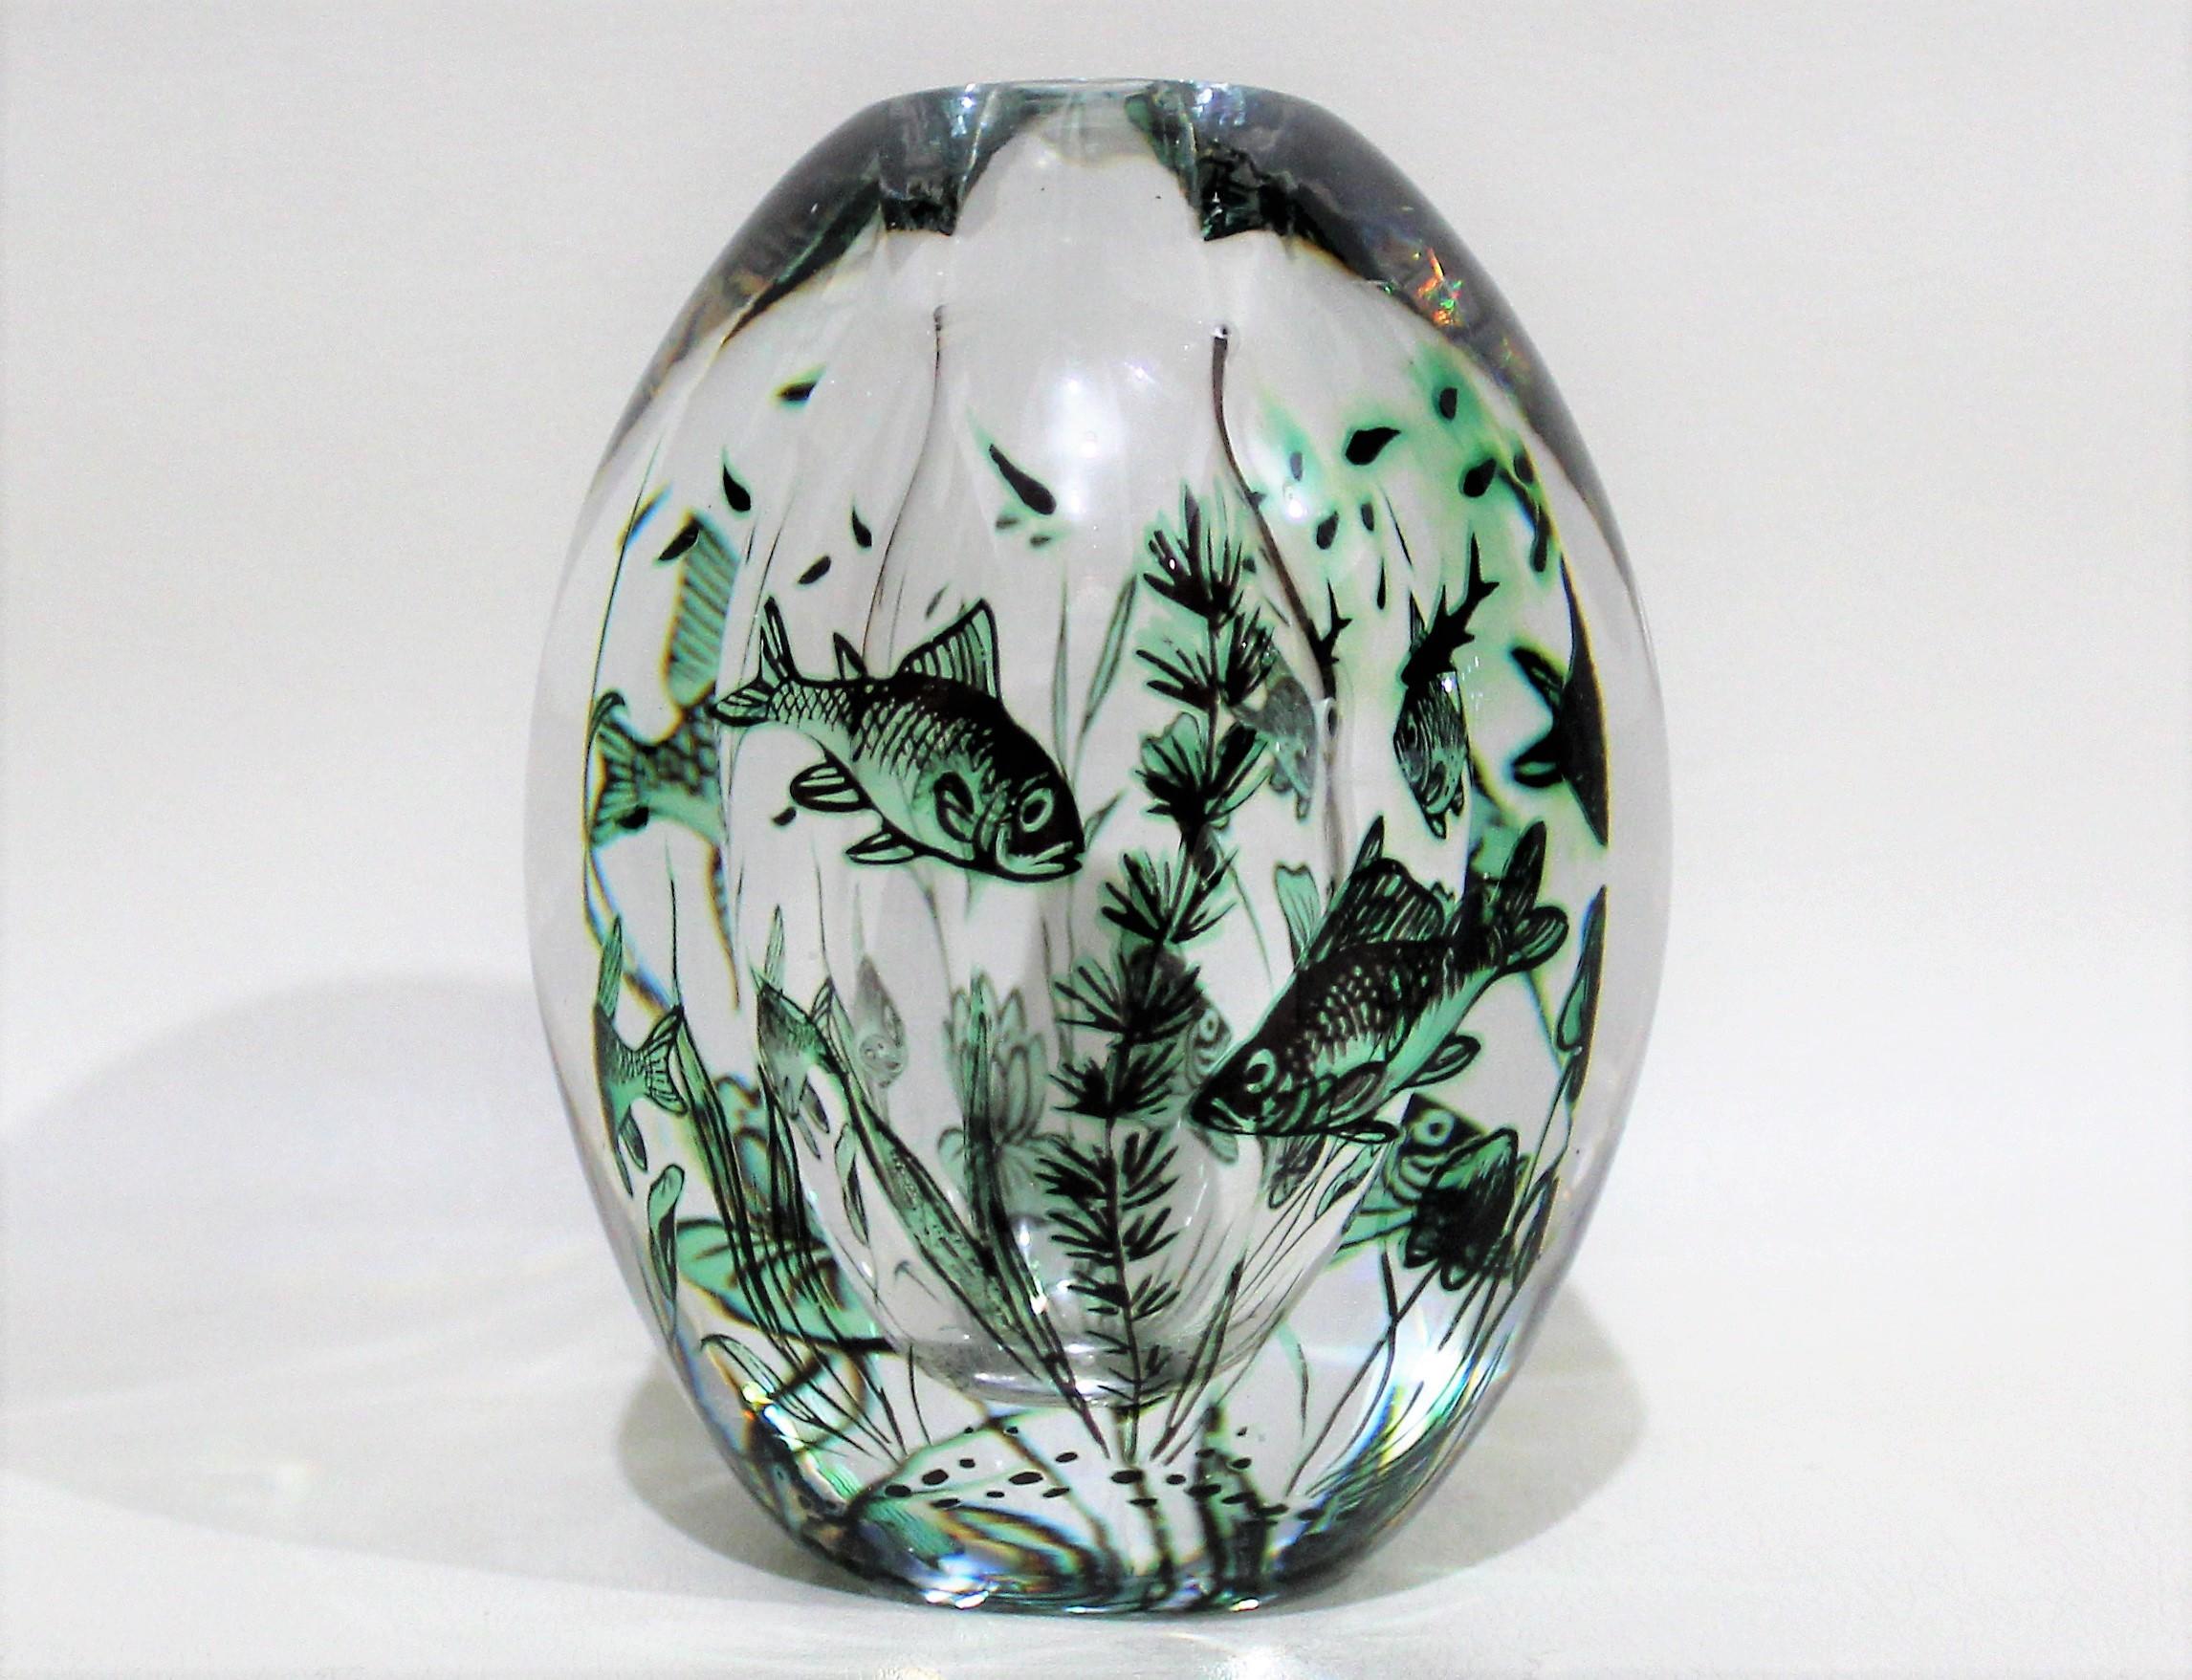 A vintage glass vase, rendered using the 'graal' technique (twice-blown), with depictions of floating fish among seaweed. Produced circa 1950s by artist Edward Hald for Orrefors of Sweden. The maker's mark and artist's signature are etched on the